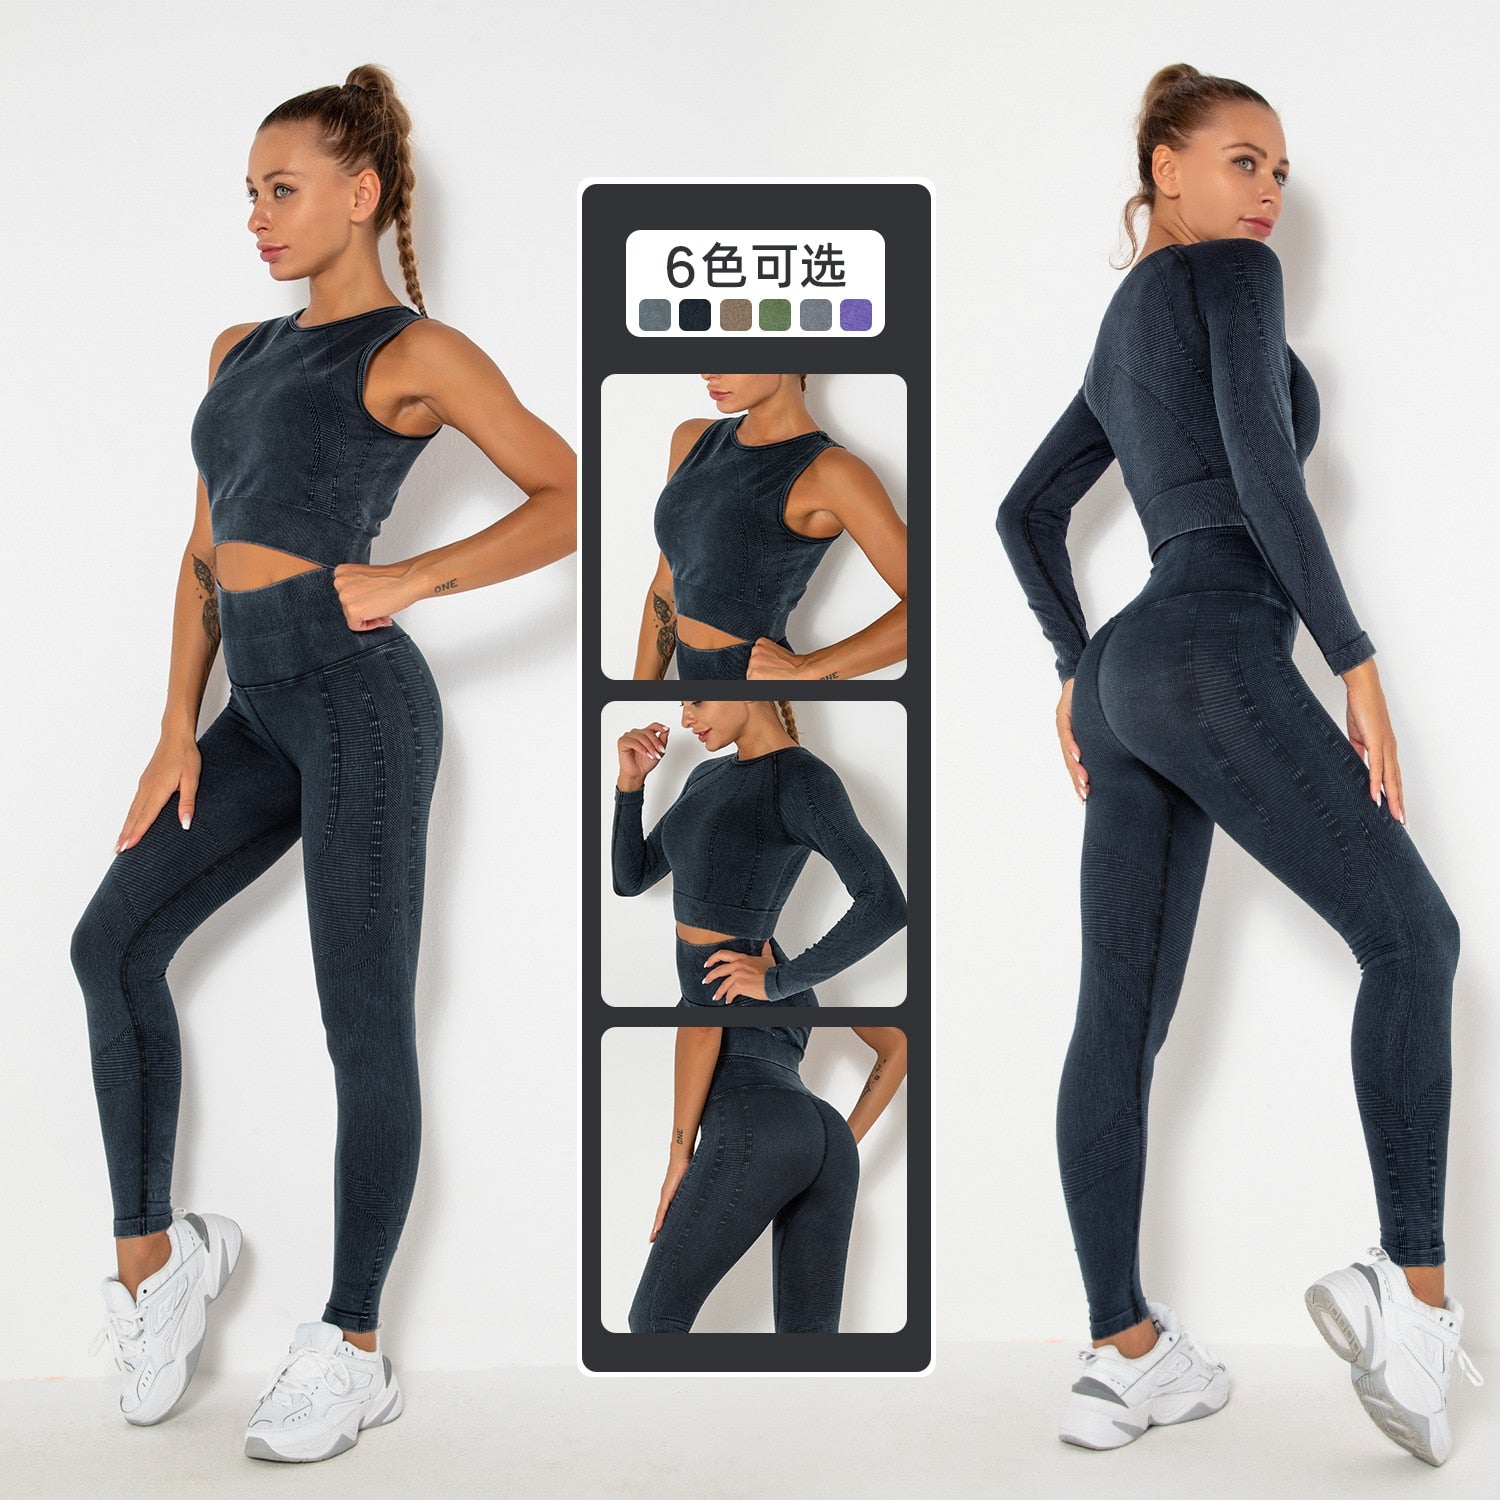 1 Piece Yoga Set For Women Gym Workout Clothing Women's Tracksuit